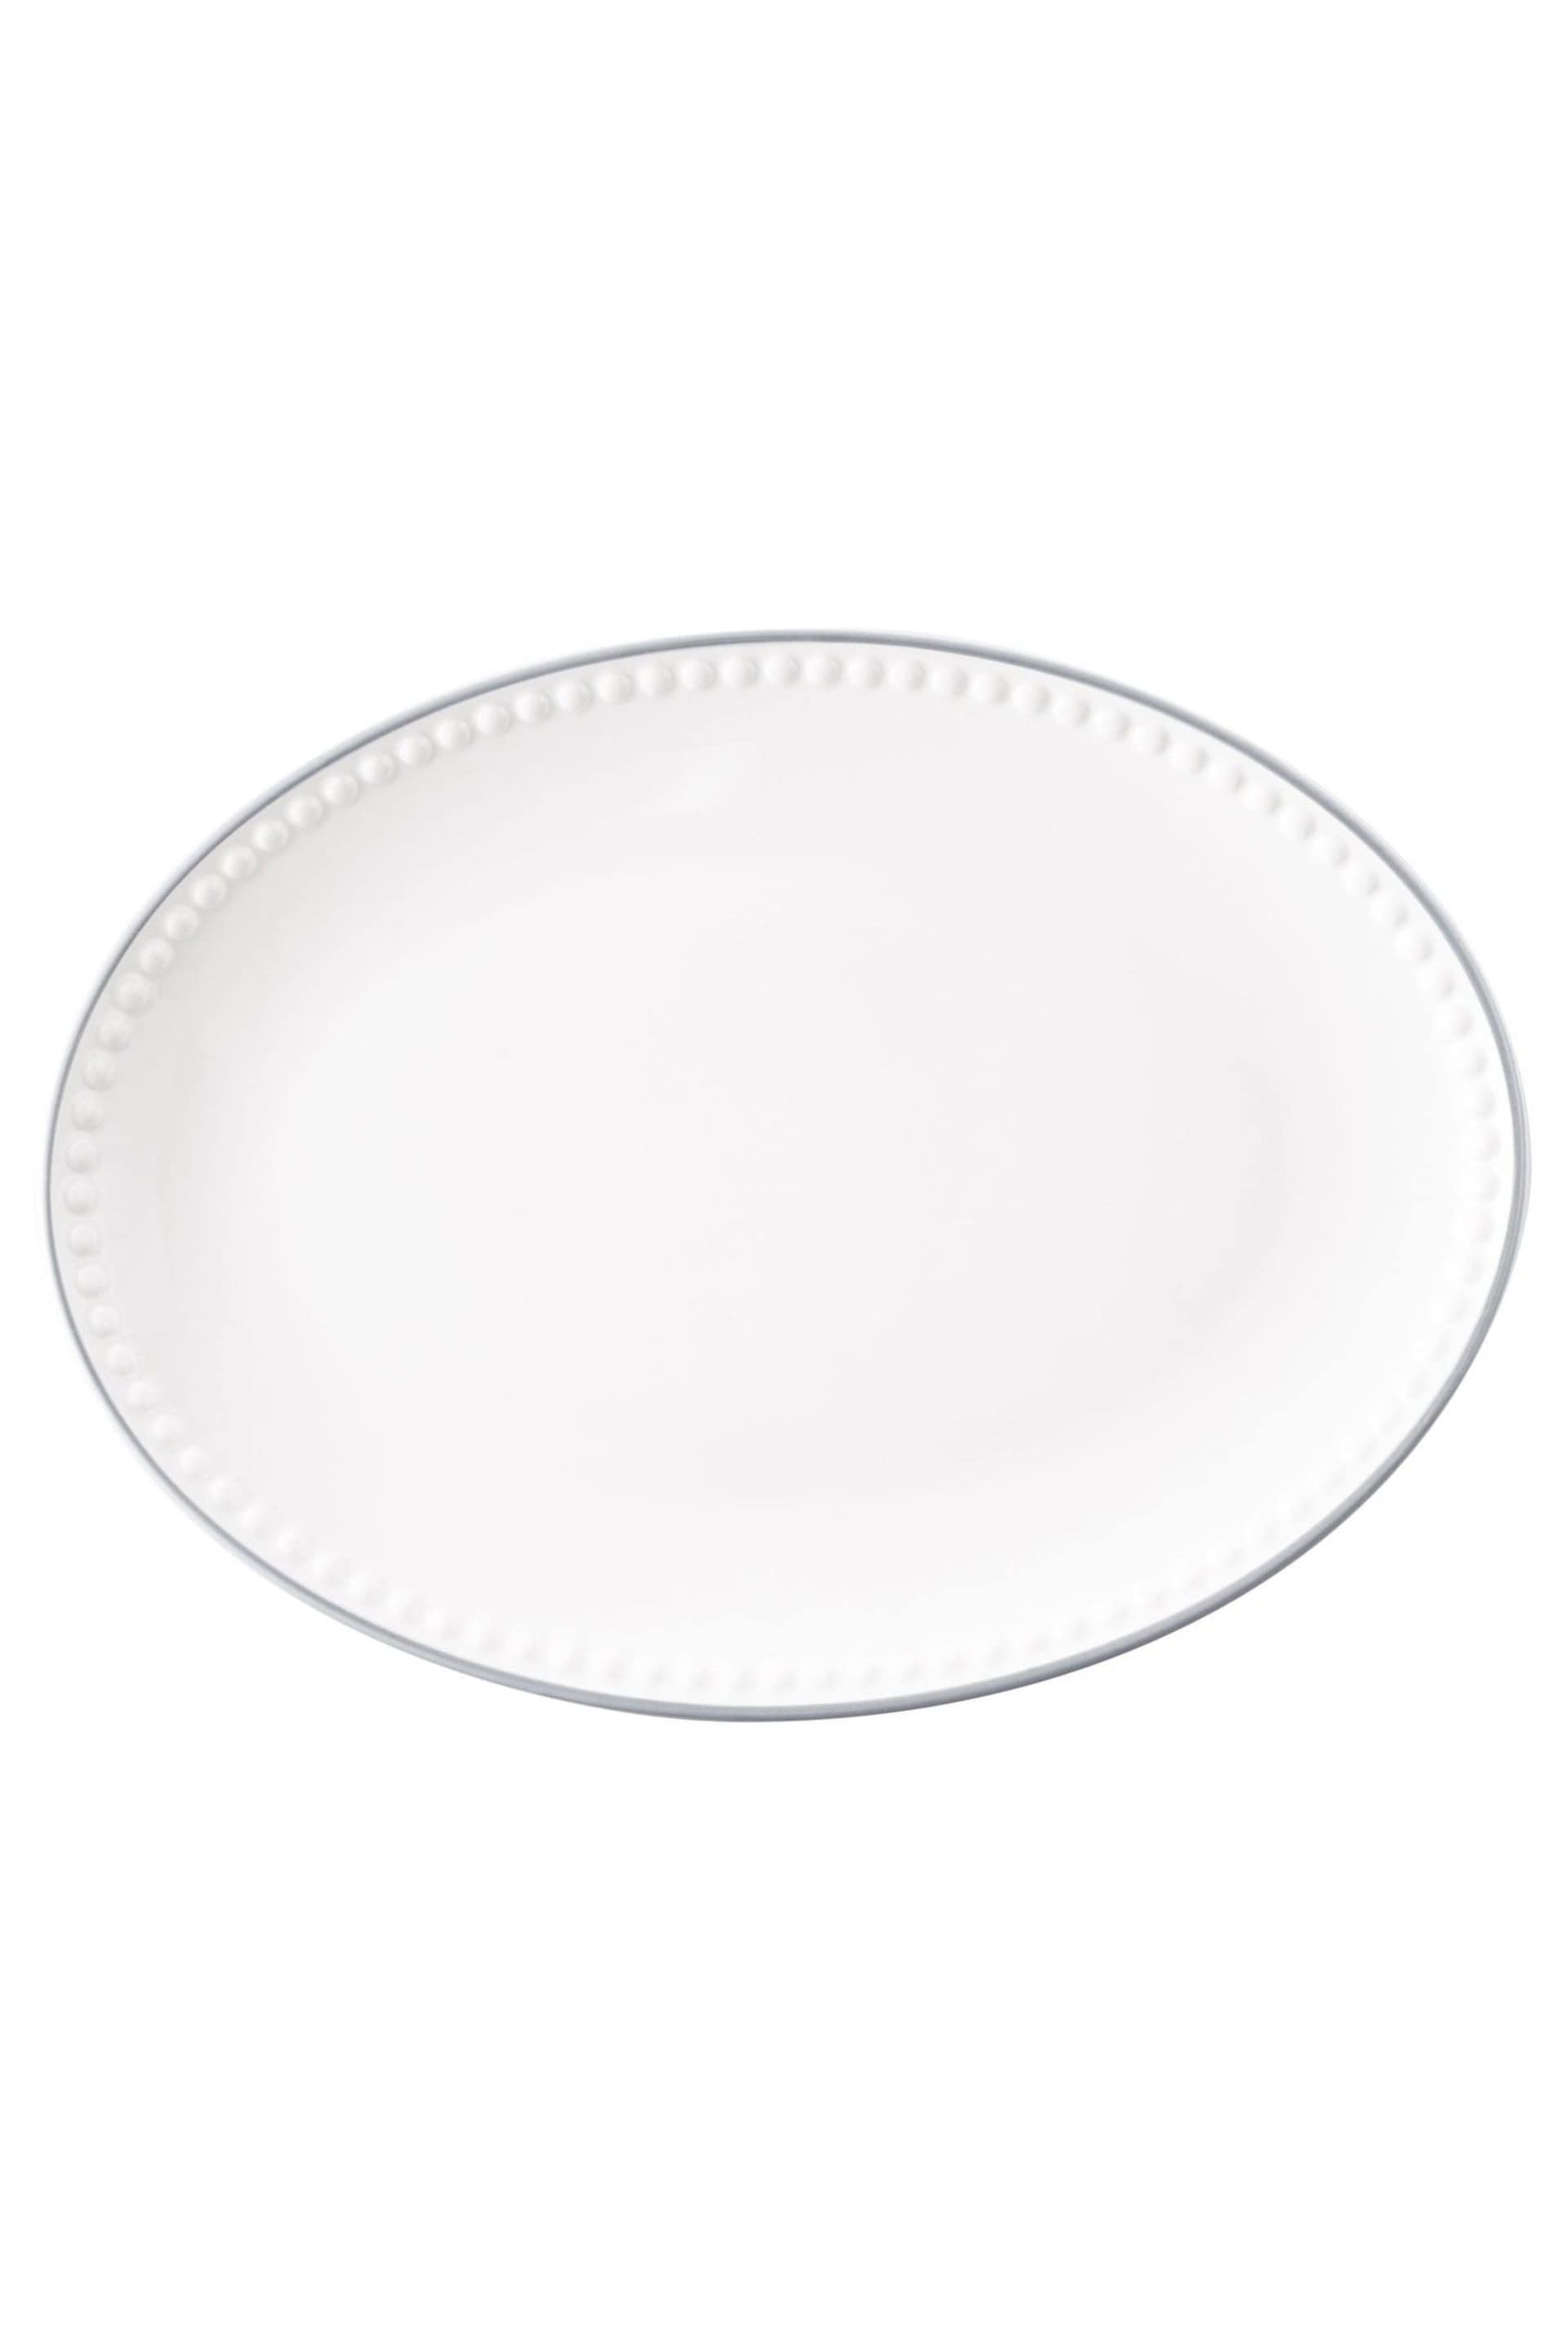 Mary Berry Set of 2 White Signature Small Oval Serving Platters - Image 3 of 3